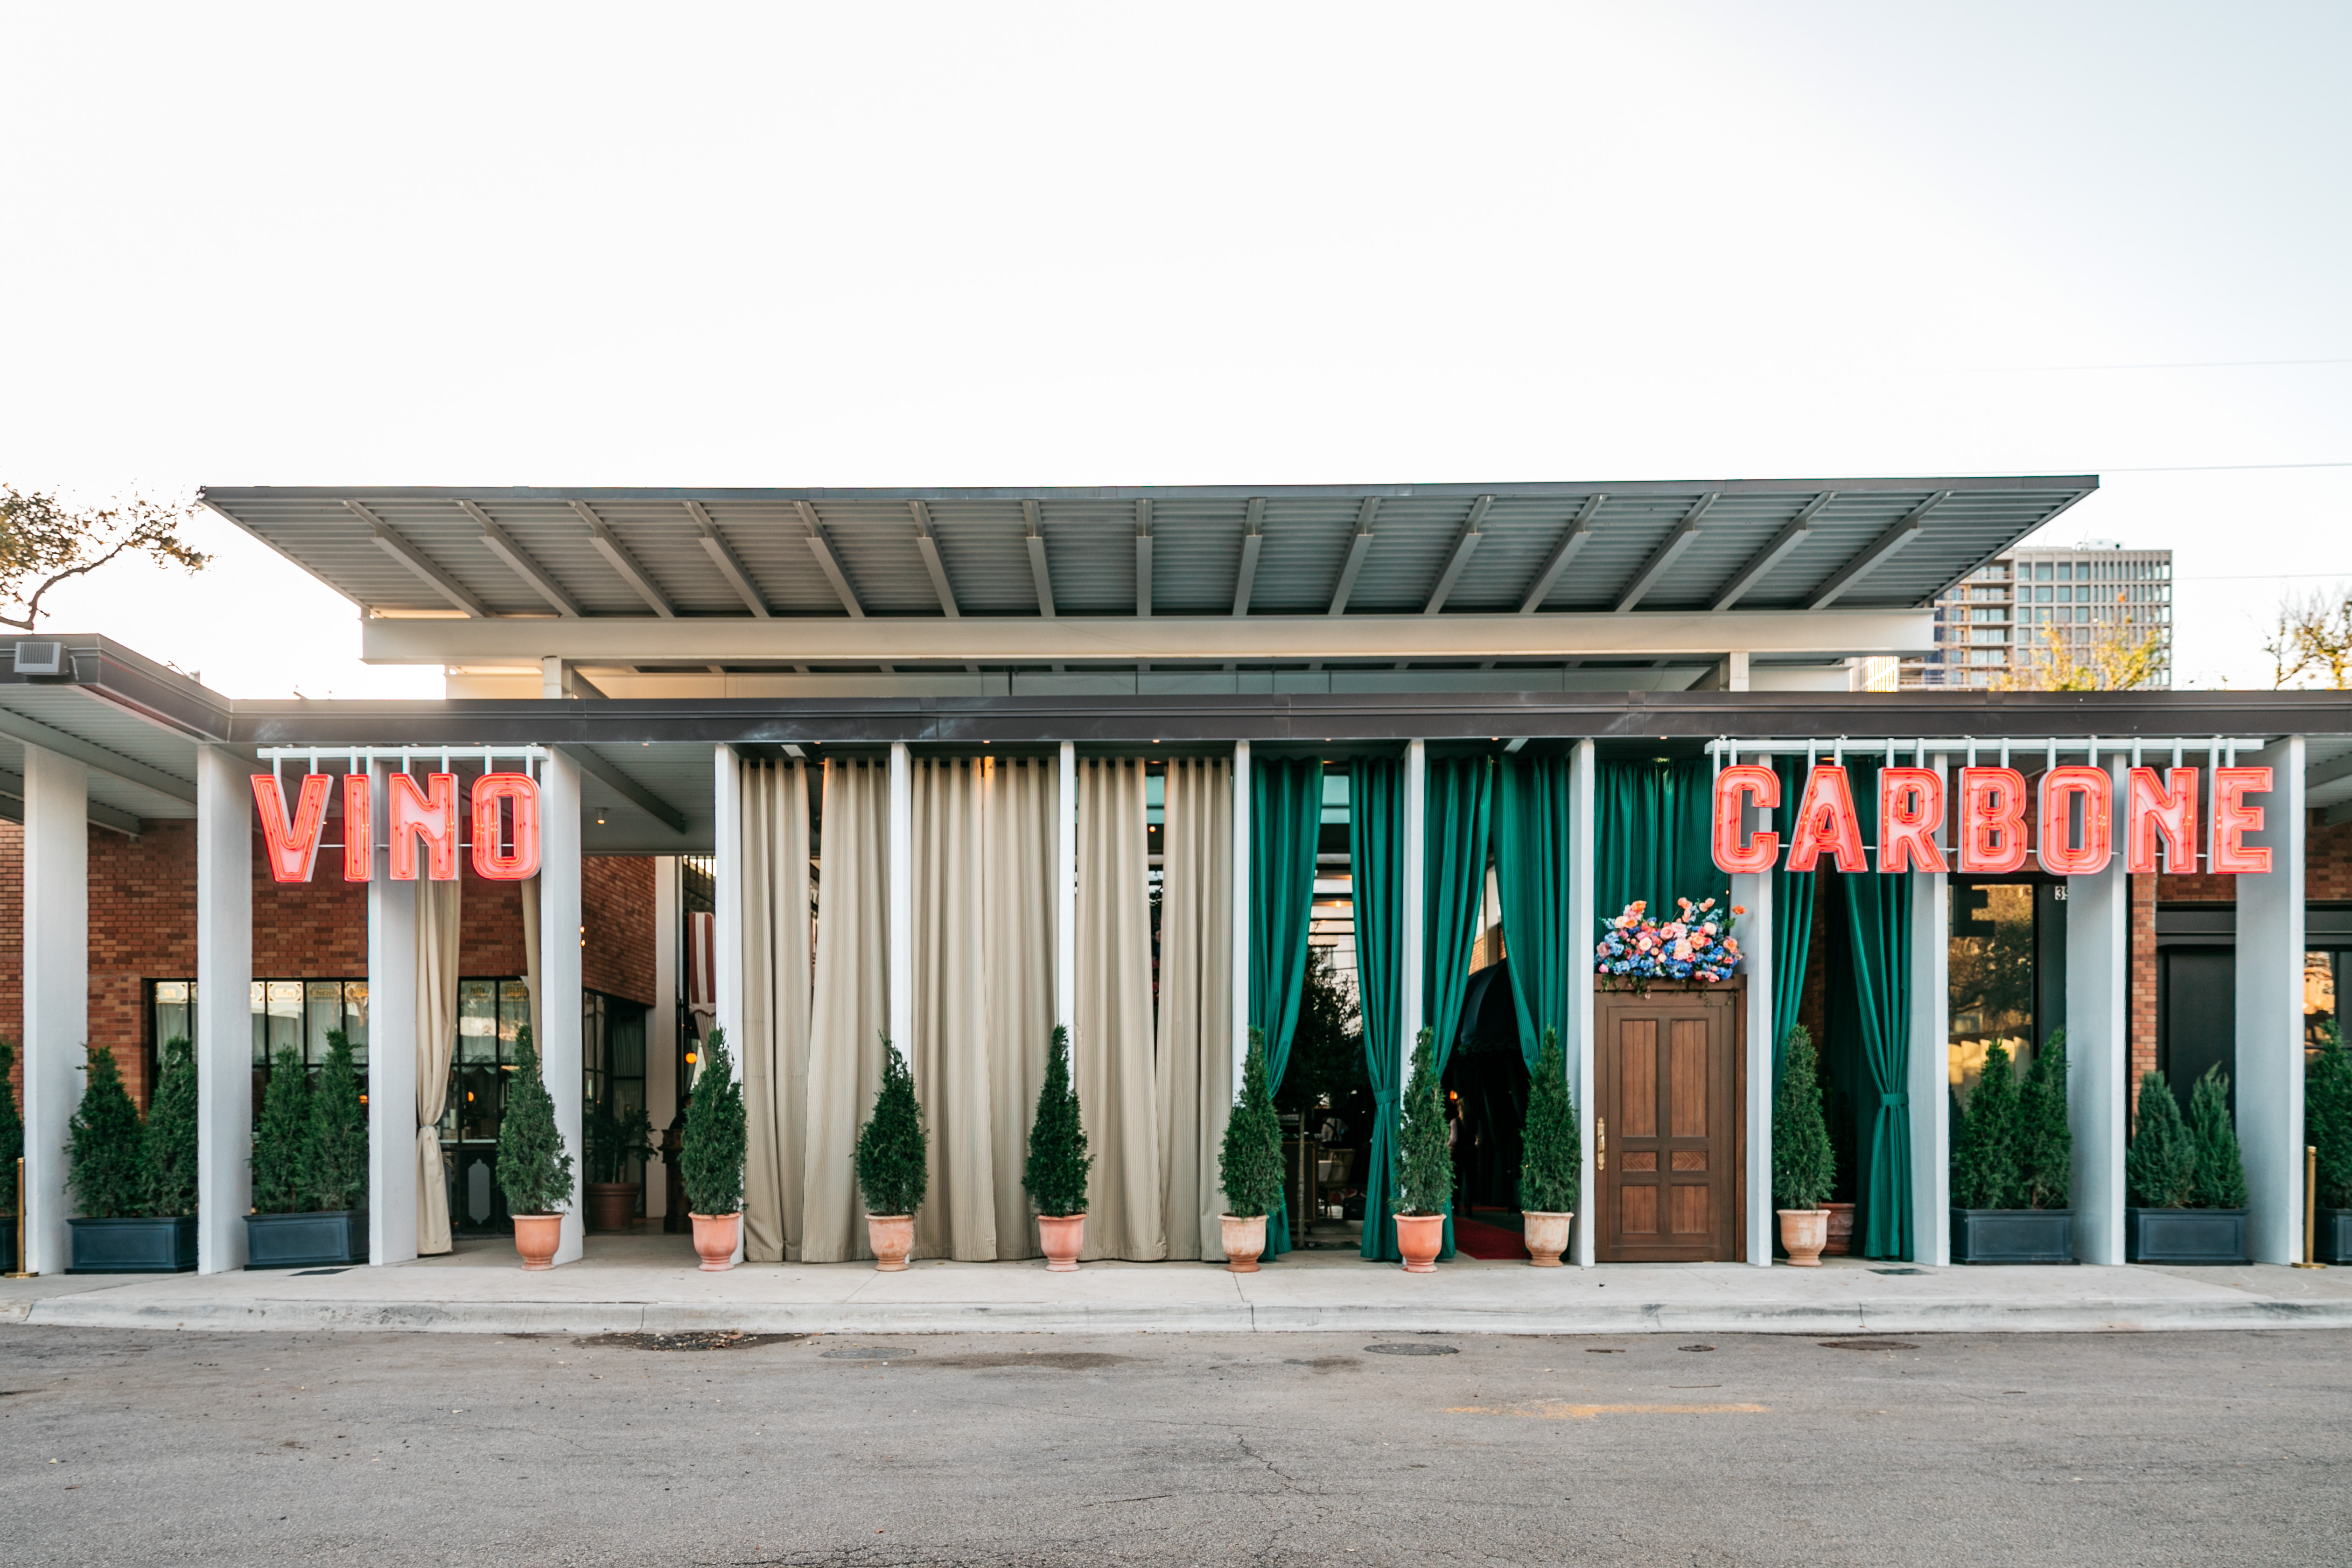 The exterior of Carbone Vino, a midcentury design building with all windows separated by partitions every few feet and an overhang. The neon sign reads in block letters Vino Carbone. A wooden door that’s slight off center marks the entrance.